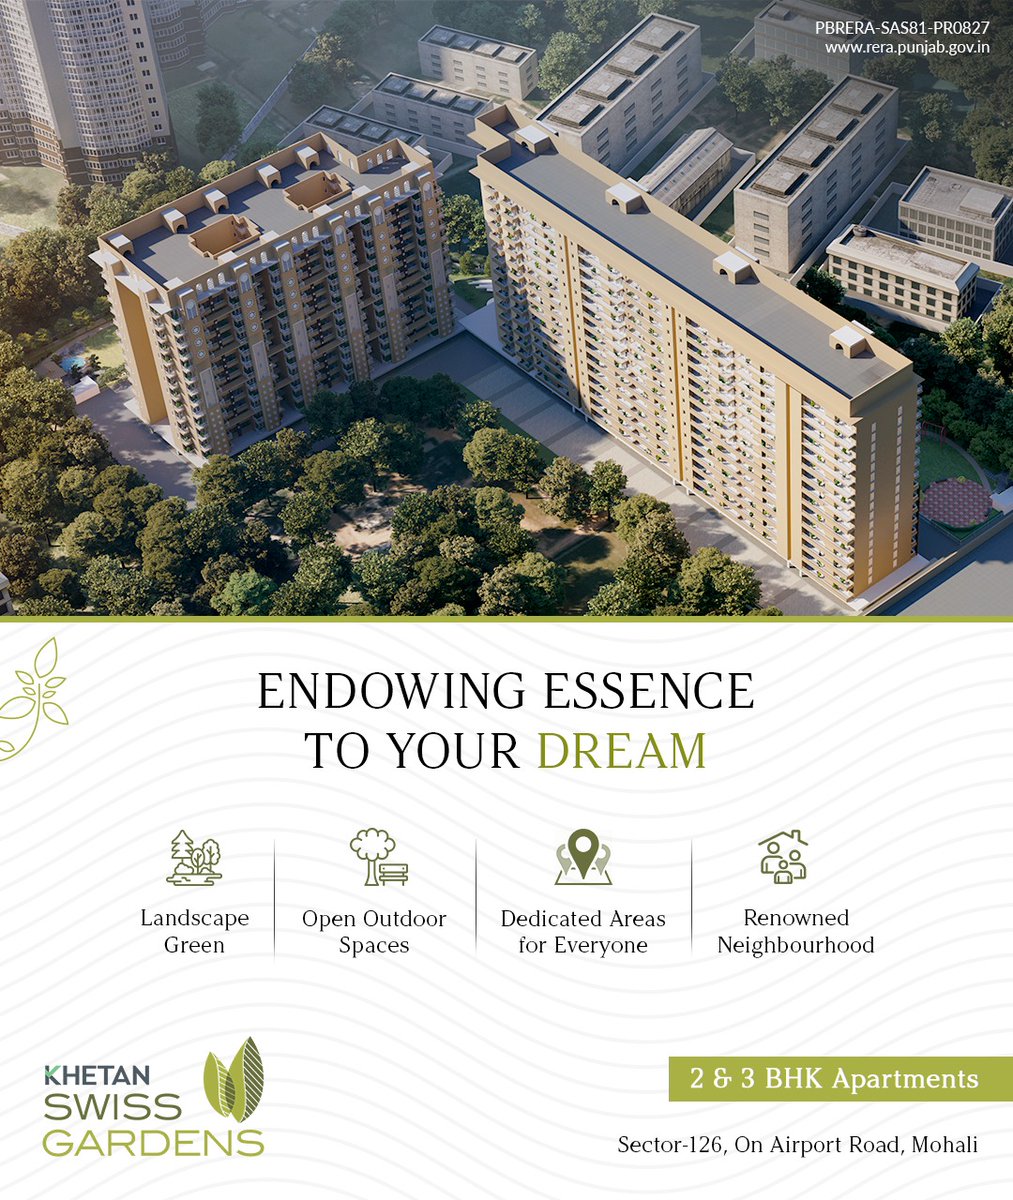 Add life to your dreams with everyday full of exquisivity. ✅ Premium 2 & 3 BHK High Rise Apartments in Mohali ↘️To know more, reach out to us at 9878433379 #KhetanSwissGardens #RealEstateDeveloper #ResidentialProperty #plots #HighRiseapartments #ResidentialPlots